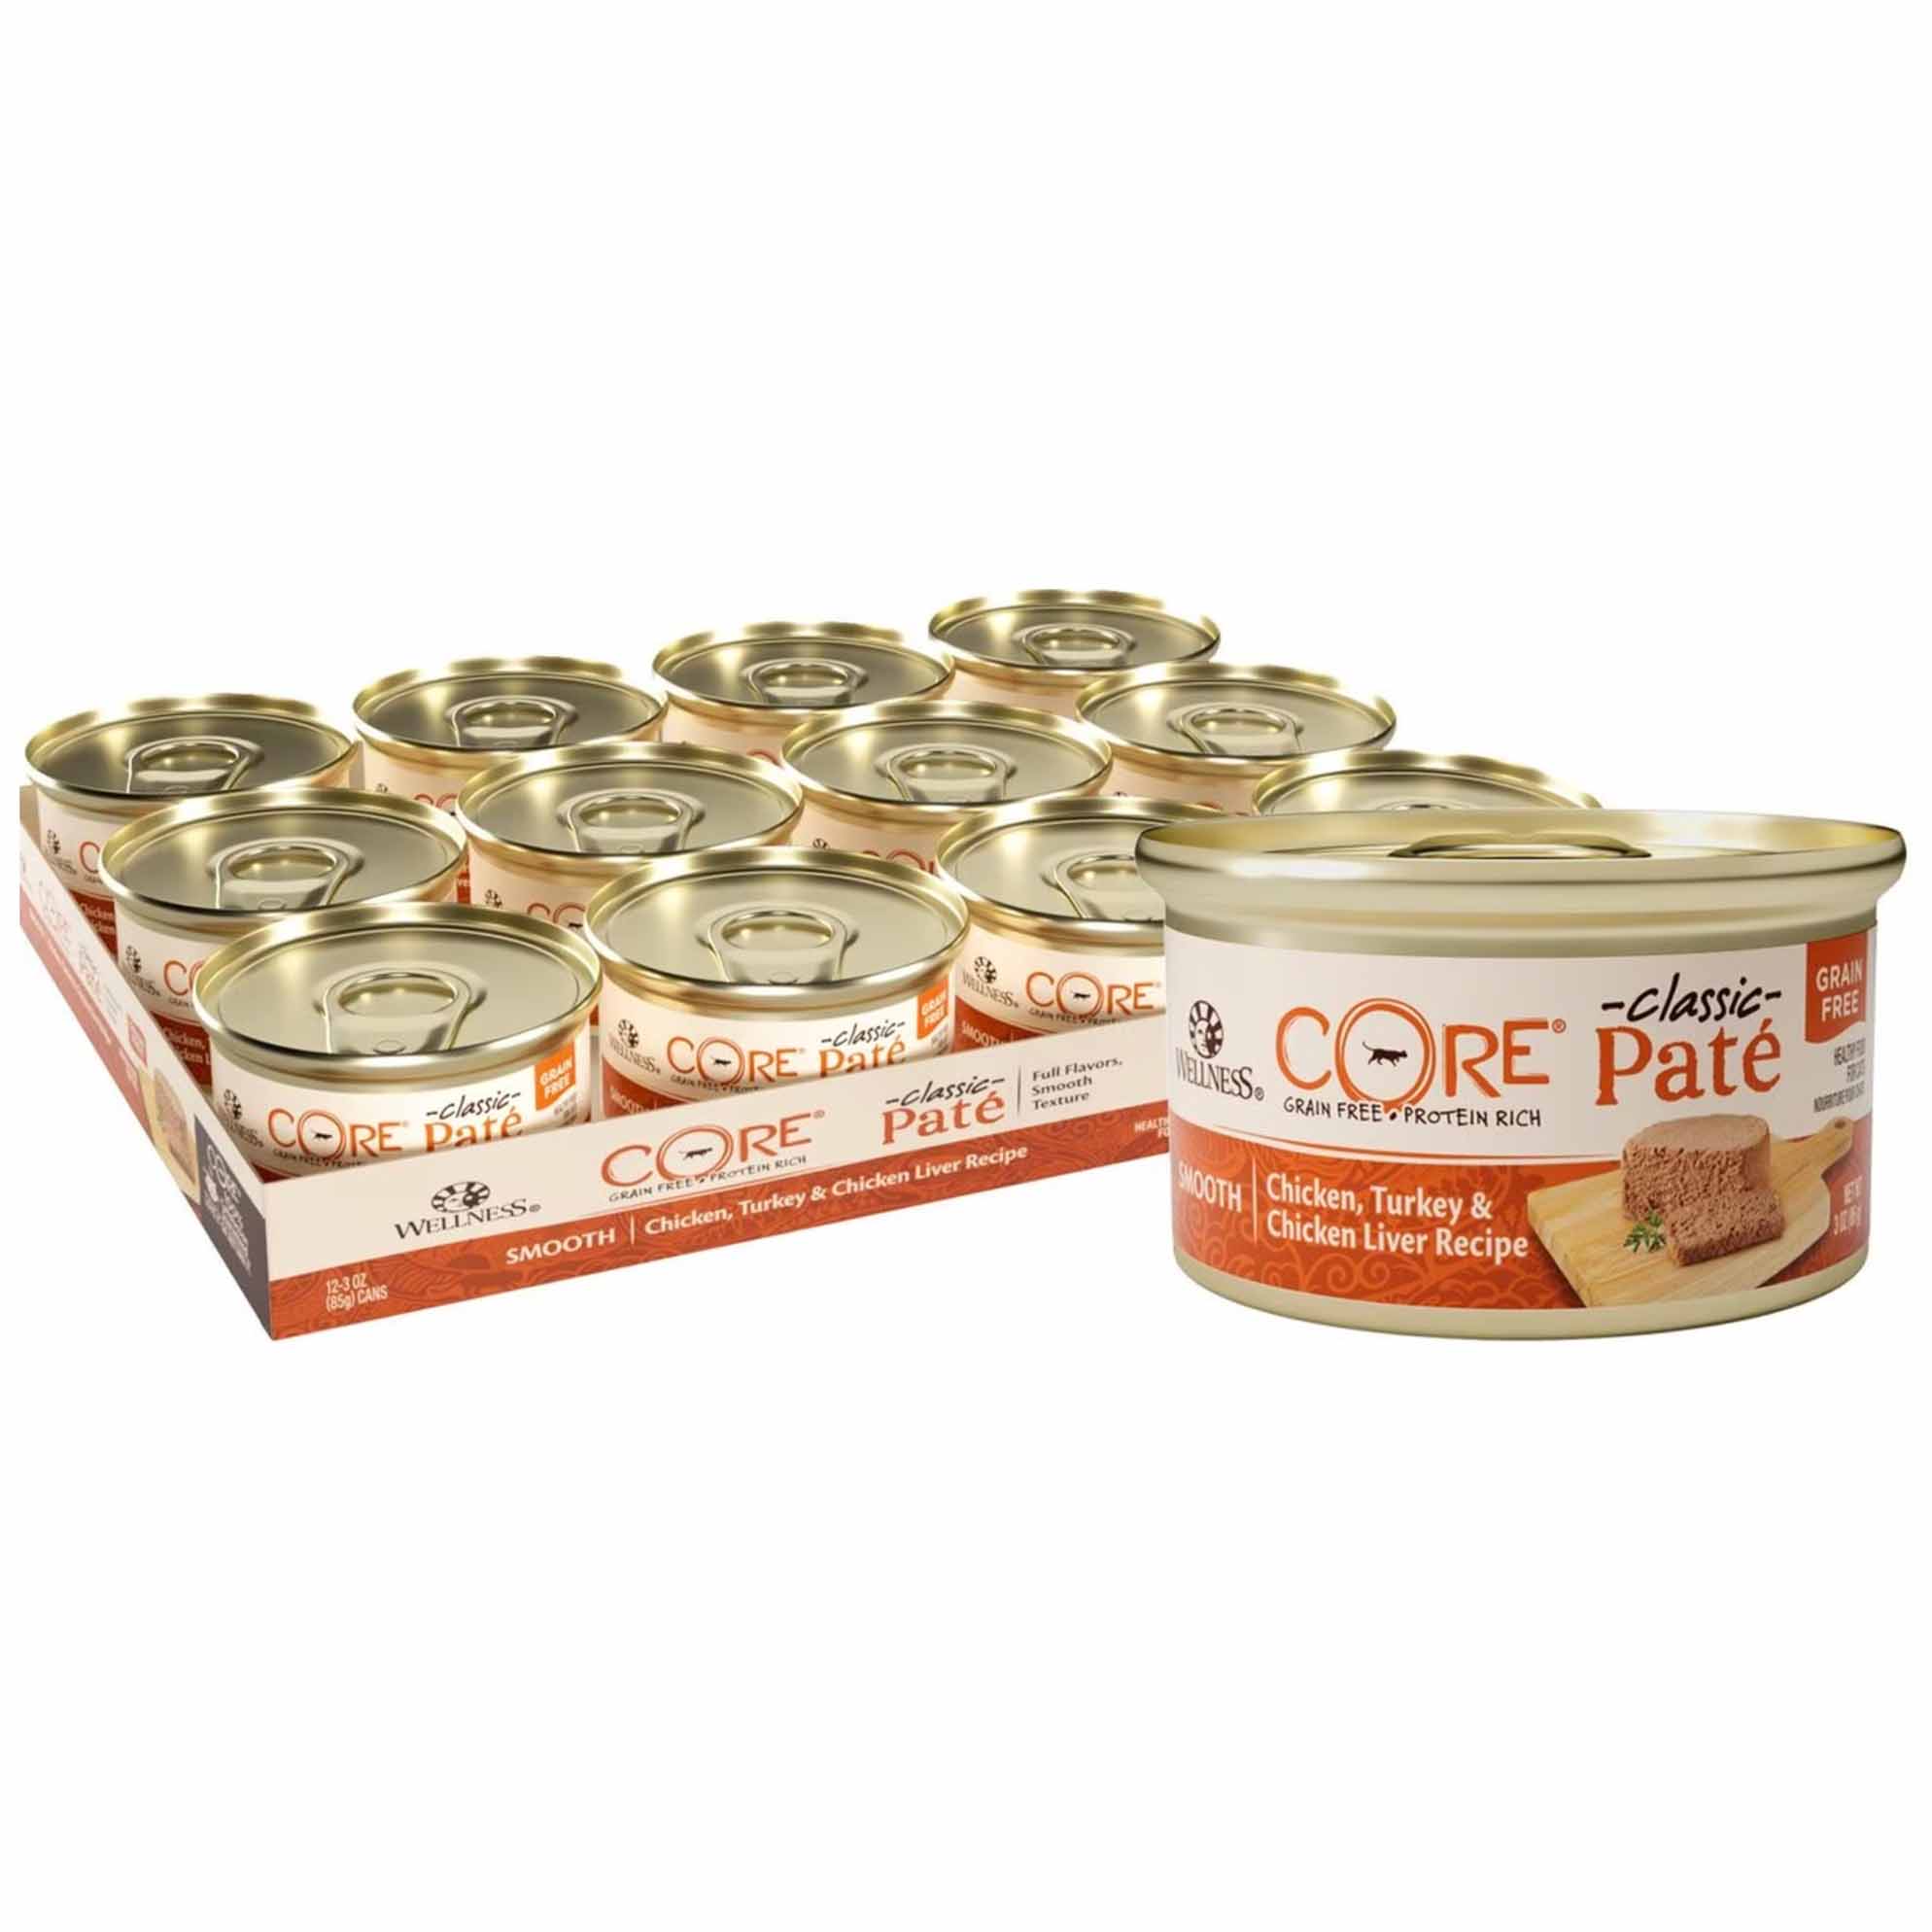 a large tin pack of Wellness CORE Grain-Free Chicken, Turkey & Chicken Liver Formula Canned Cat Food